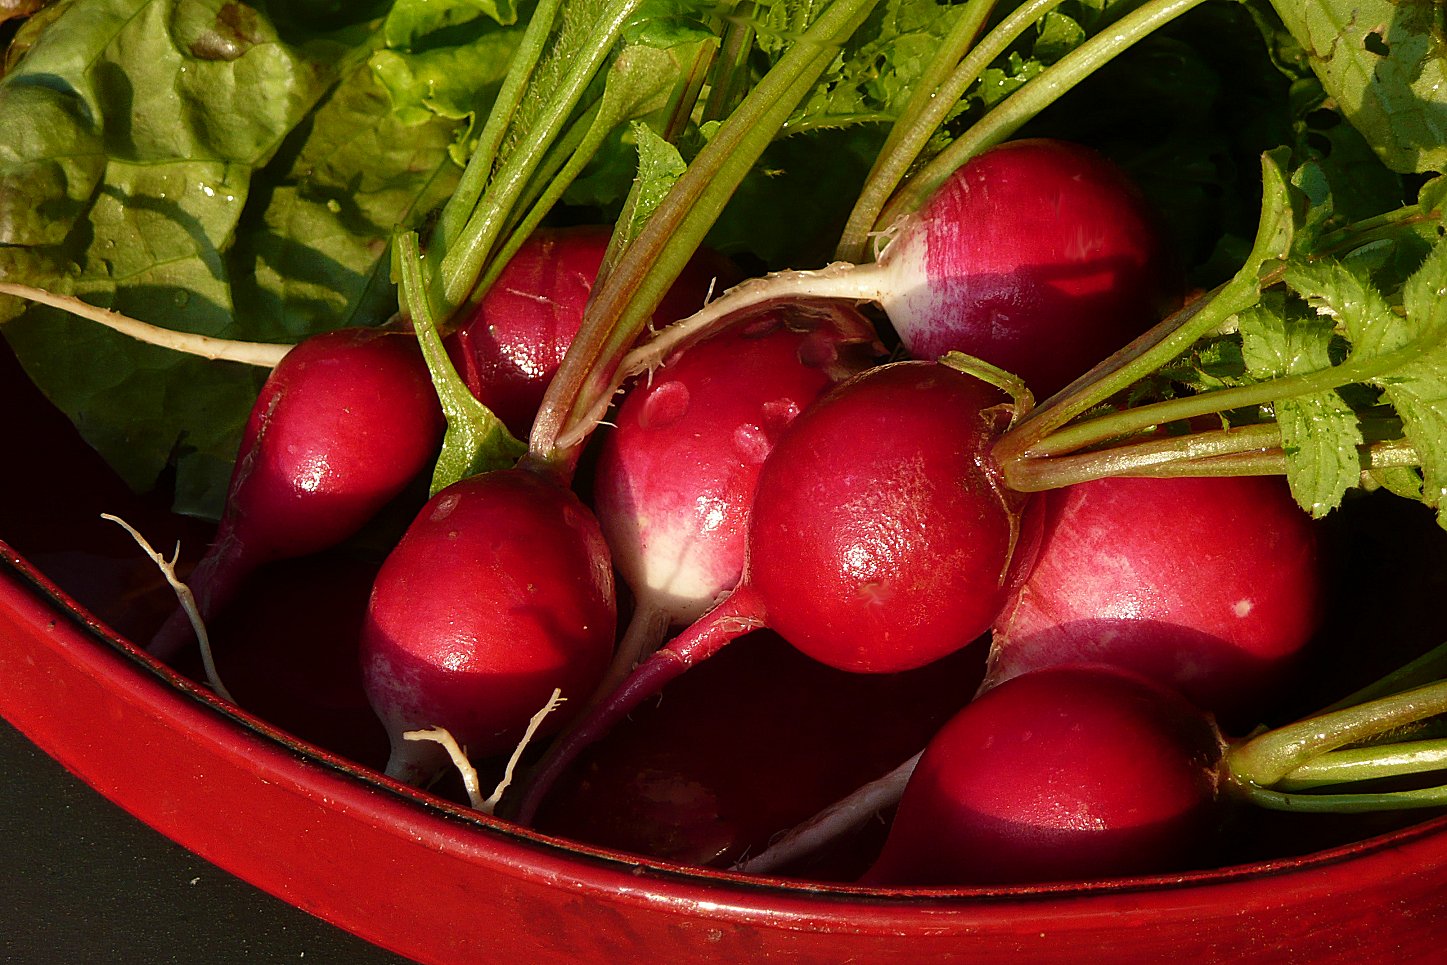 bunches of radishes in a red bowl next to lettuce